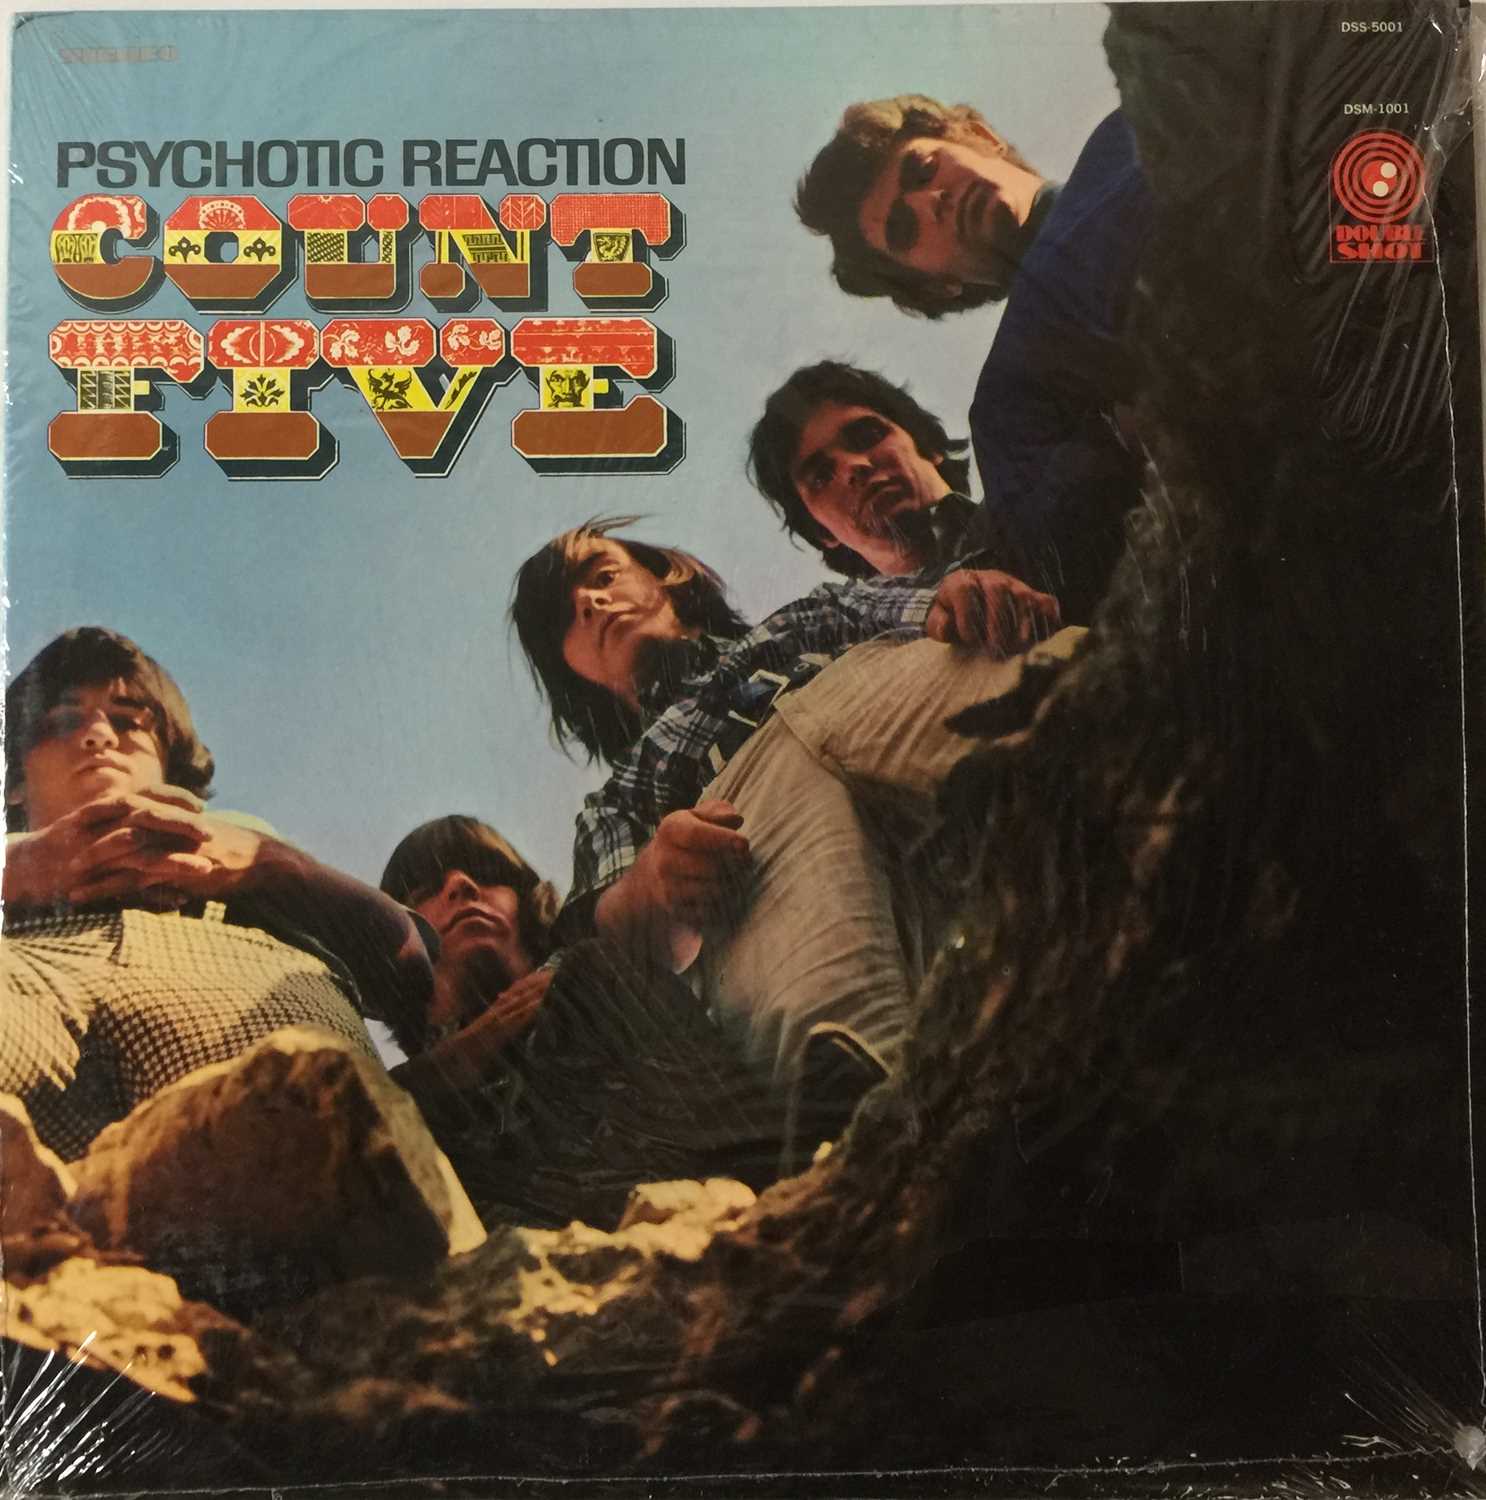 Lot 66 - COUNT FIVE - PSYCHOTIC REACTION LP US STEREO...